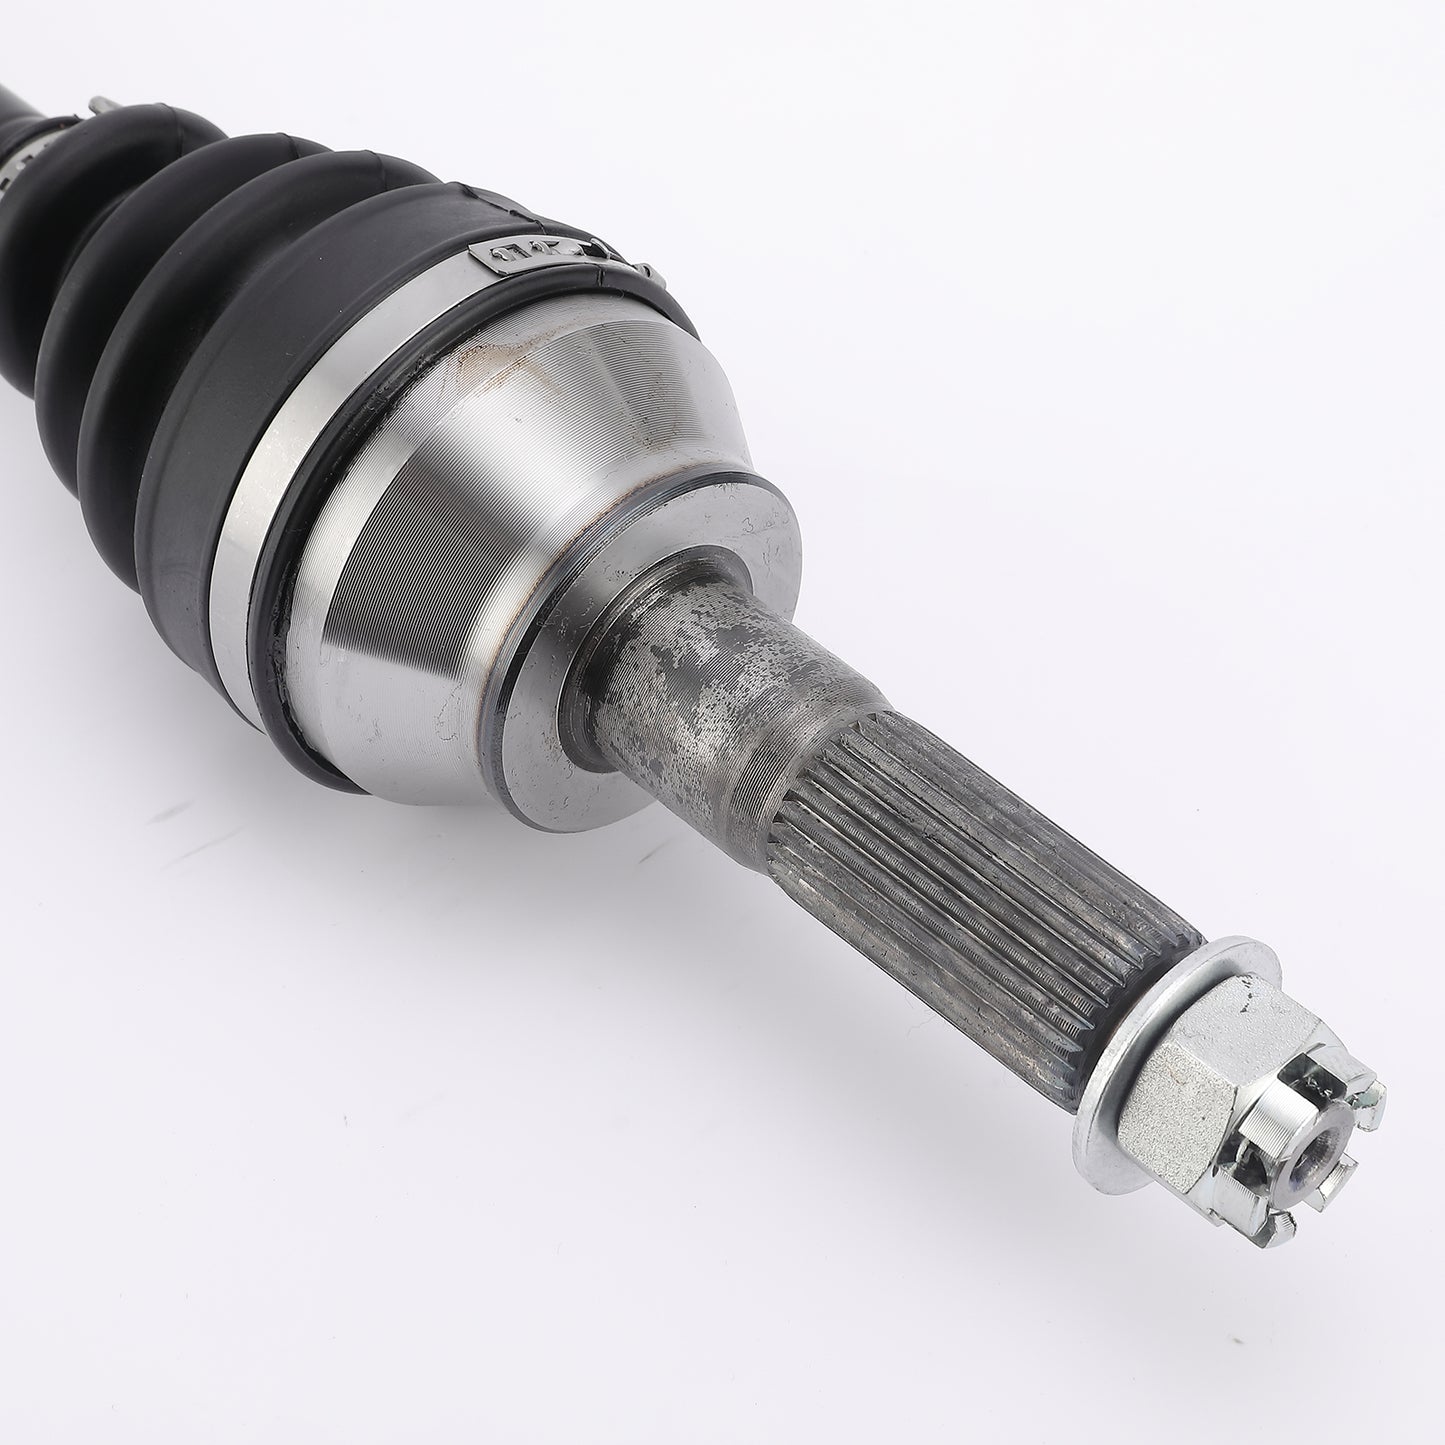 CAM-PO348 Rear Right Drive Shaft CV Axle Compatible with 2009-2007 RANGER 500 2x4 1332503 1332576